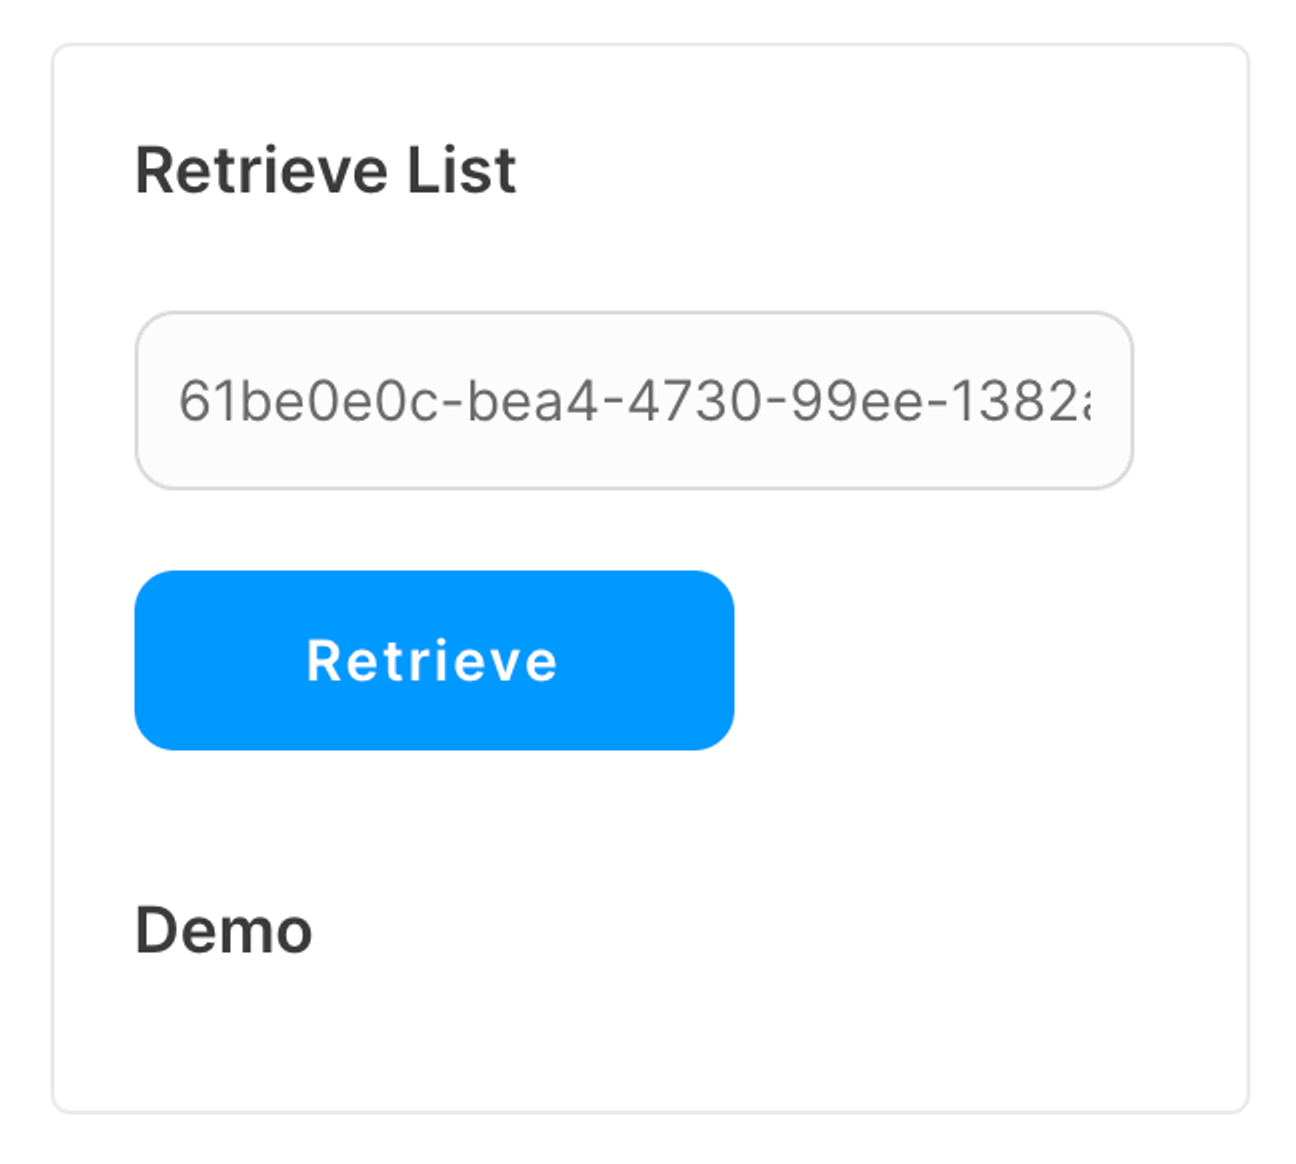 In this example, our list named "Demo" was returned and displayed in the group.